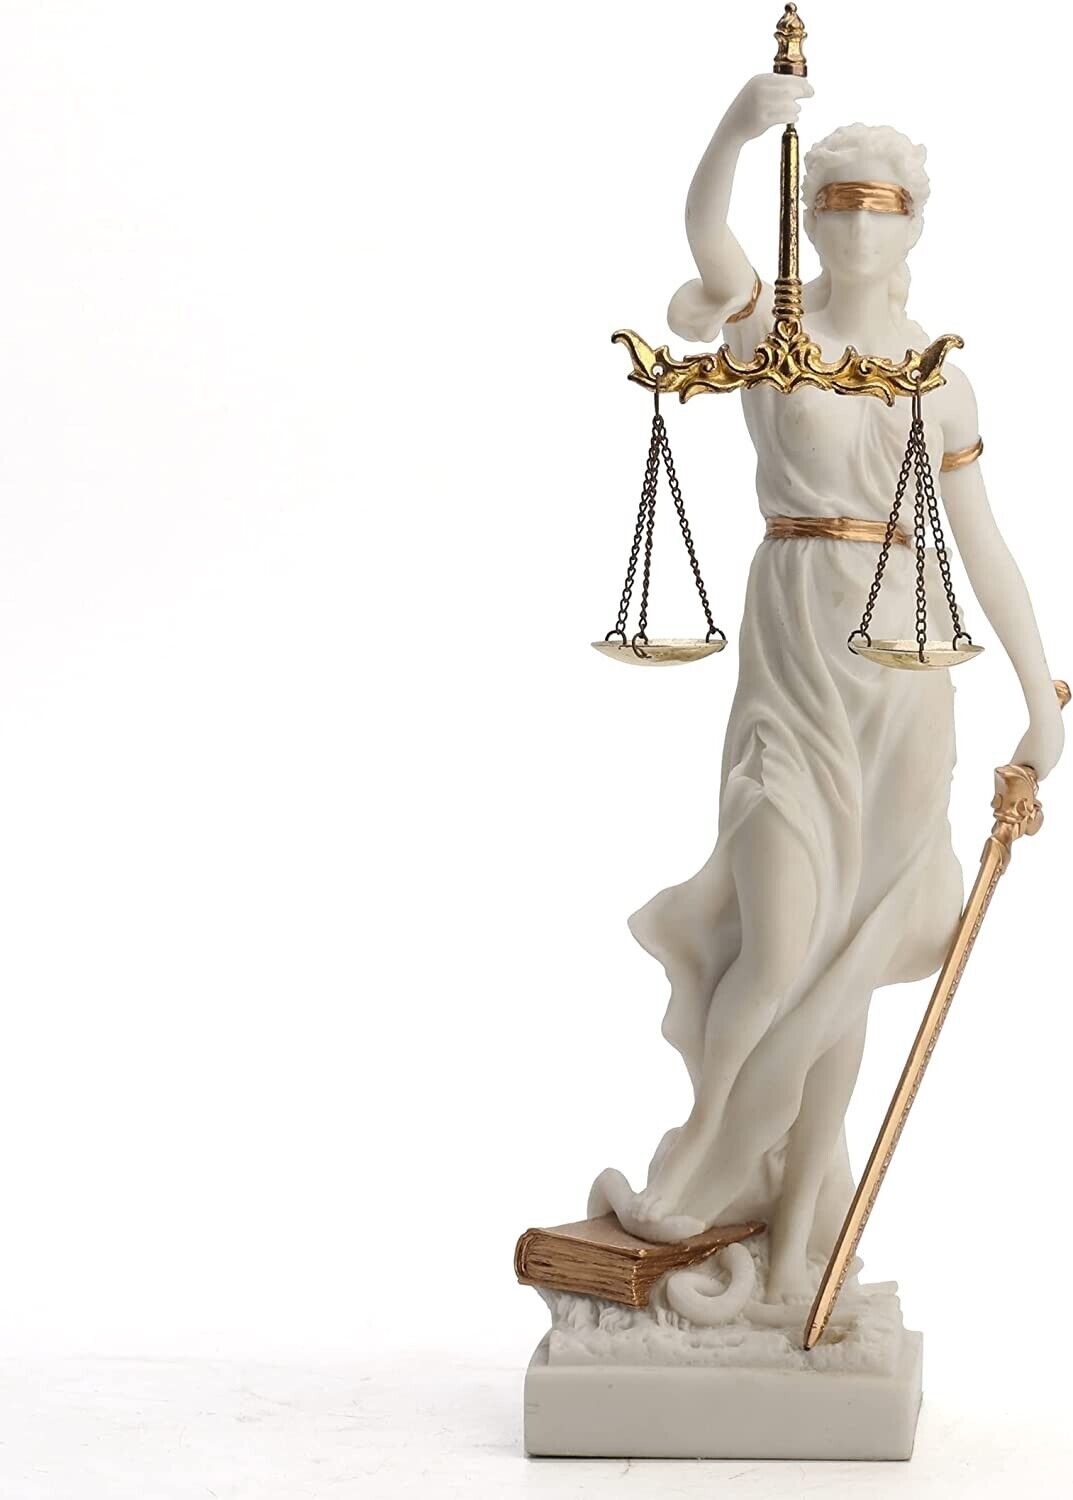 Veronese Design 12 Inch Blind Lady Justice Themis Resin Statue White Gold Finish